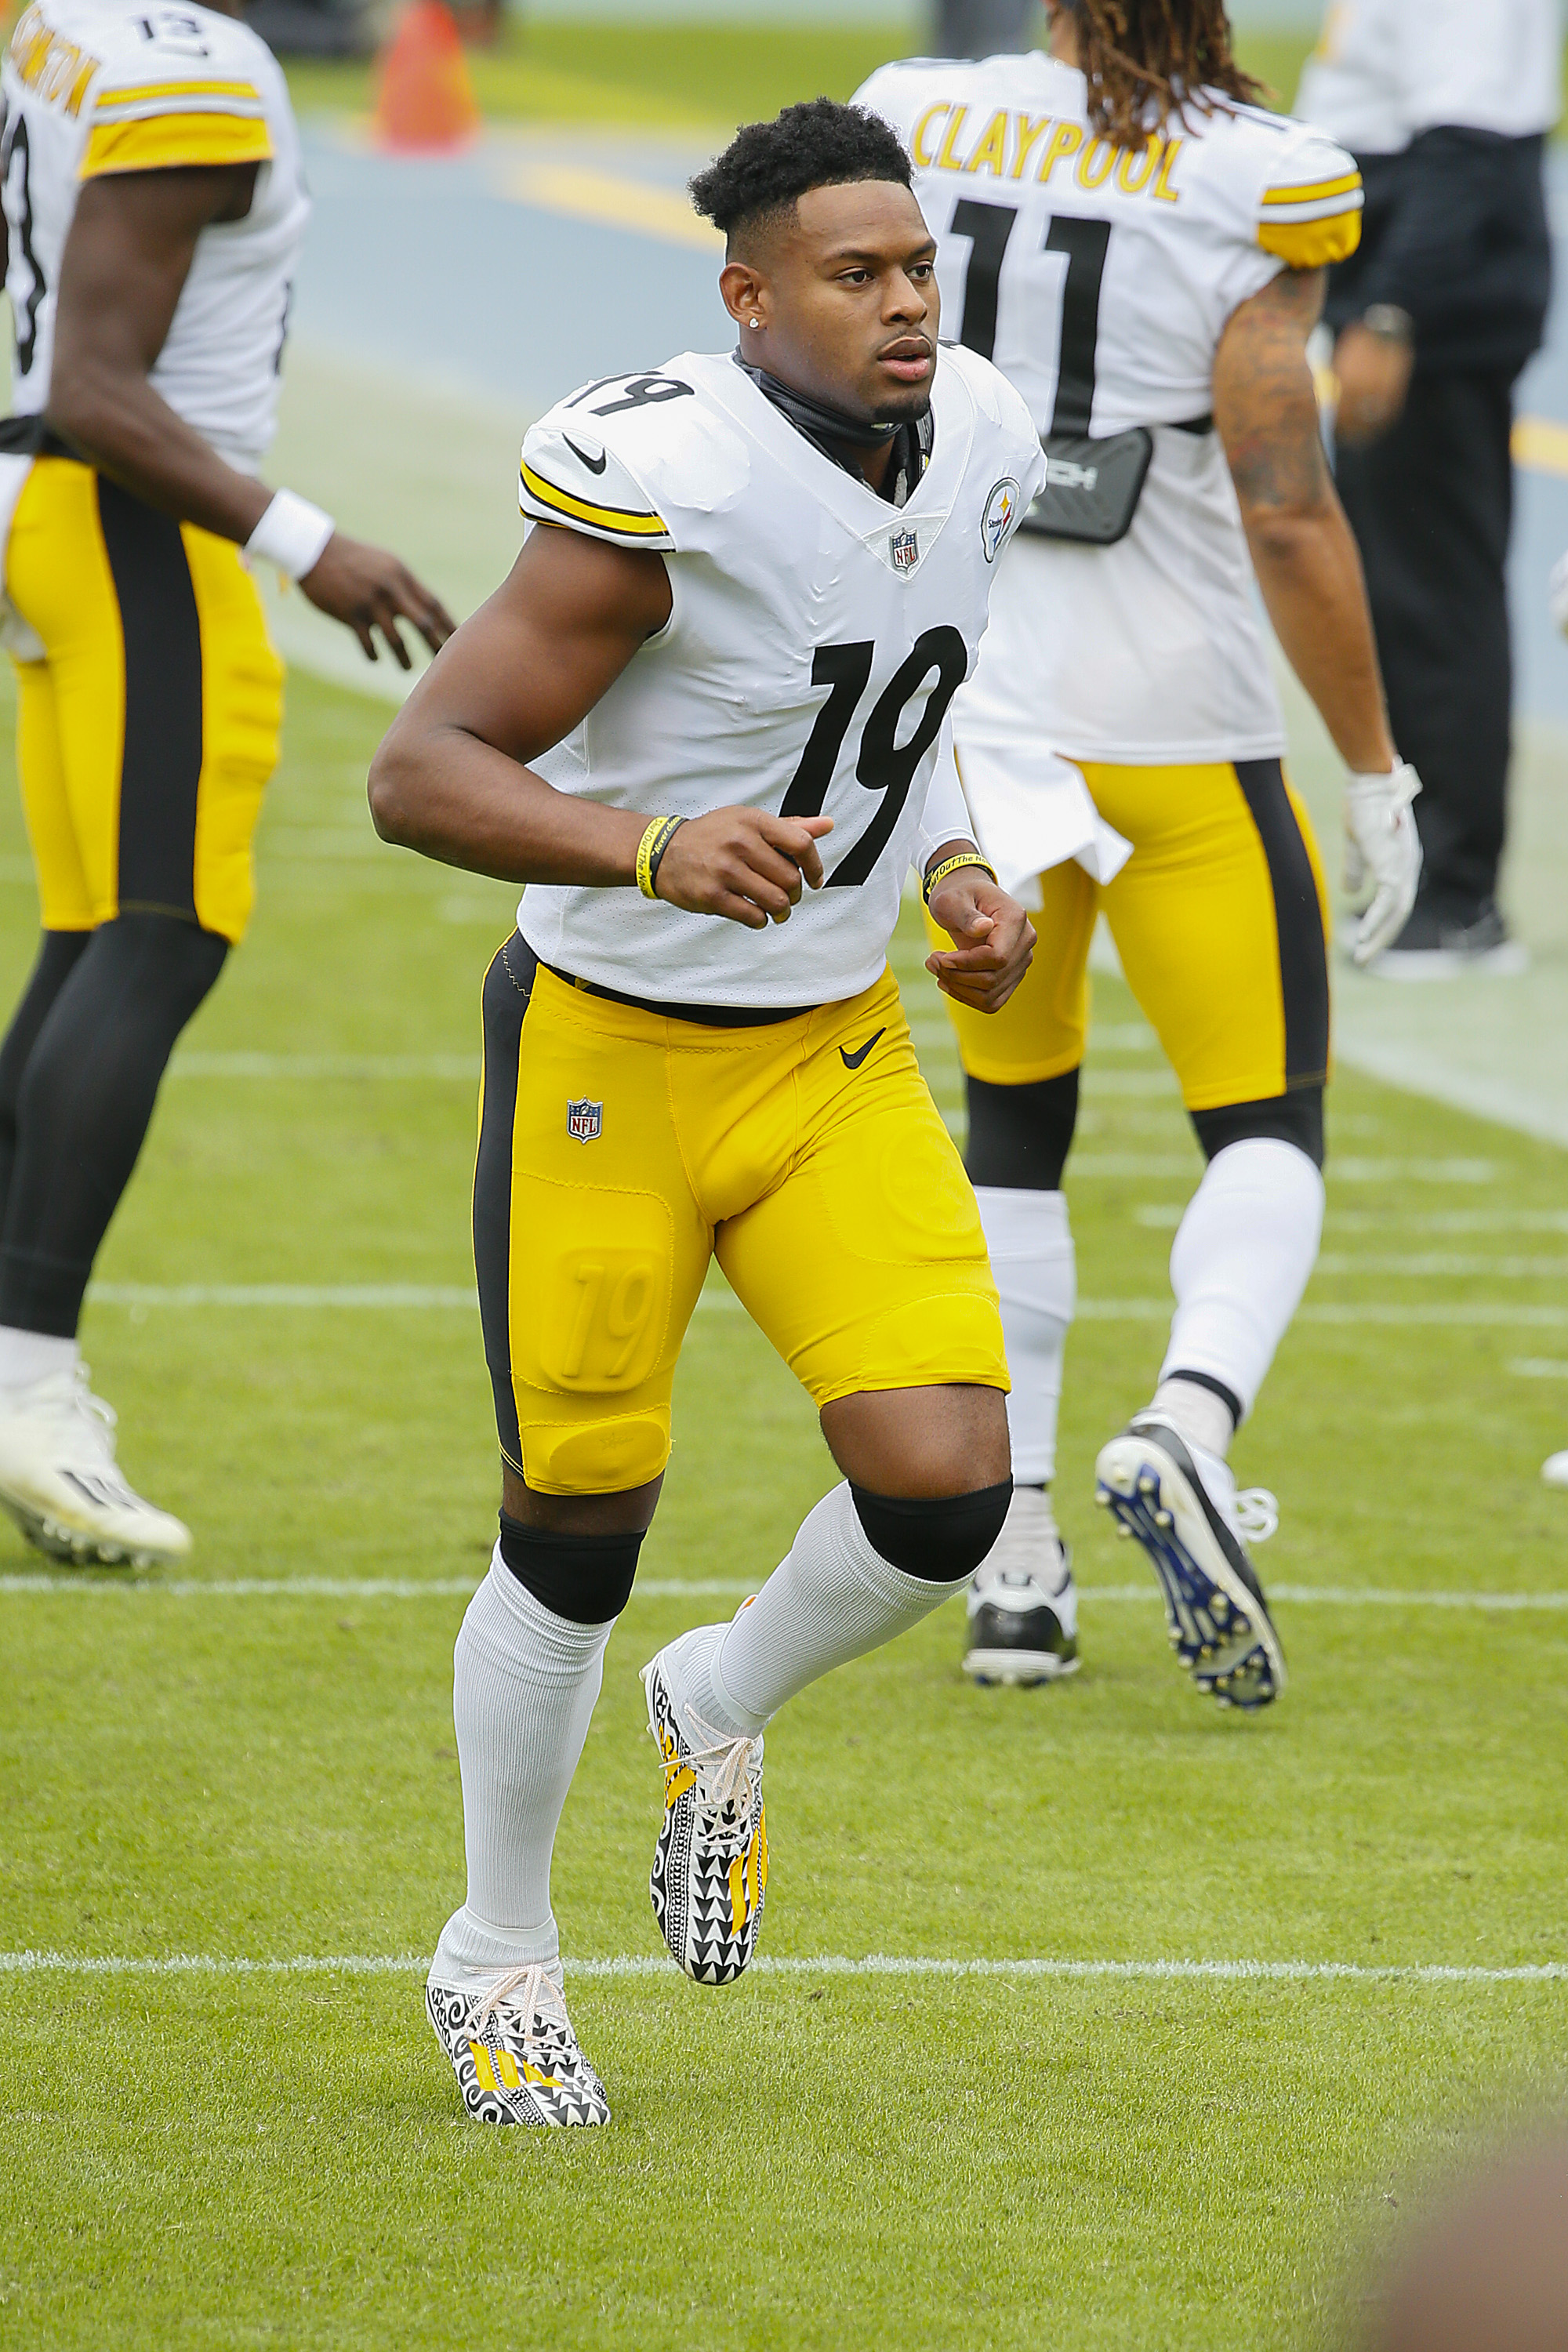 JuJu Smith-Schuster #19 of the Pittsburgh Steelers warms up prior to a game against the Tennessee Titans at Nissan Stadium on October 25, 2020, in Nashville, Tennessee. | Source: Getty Images